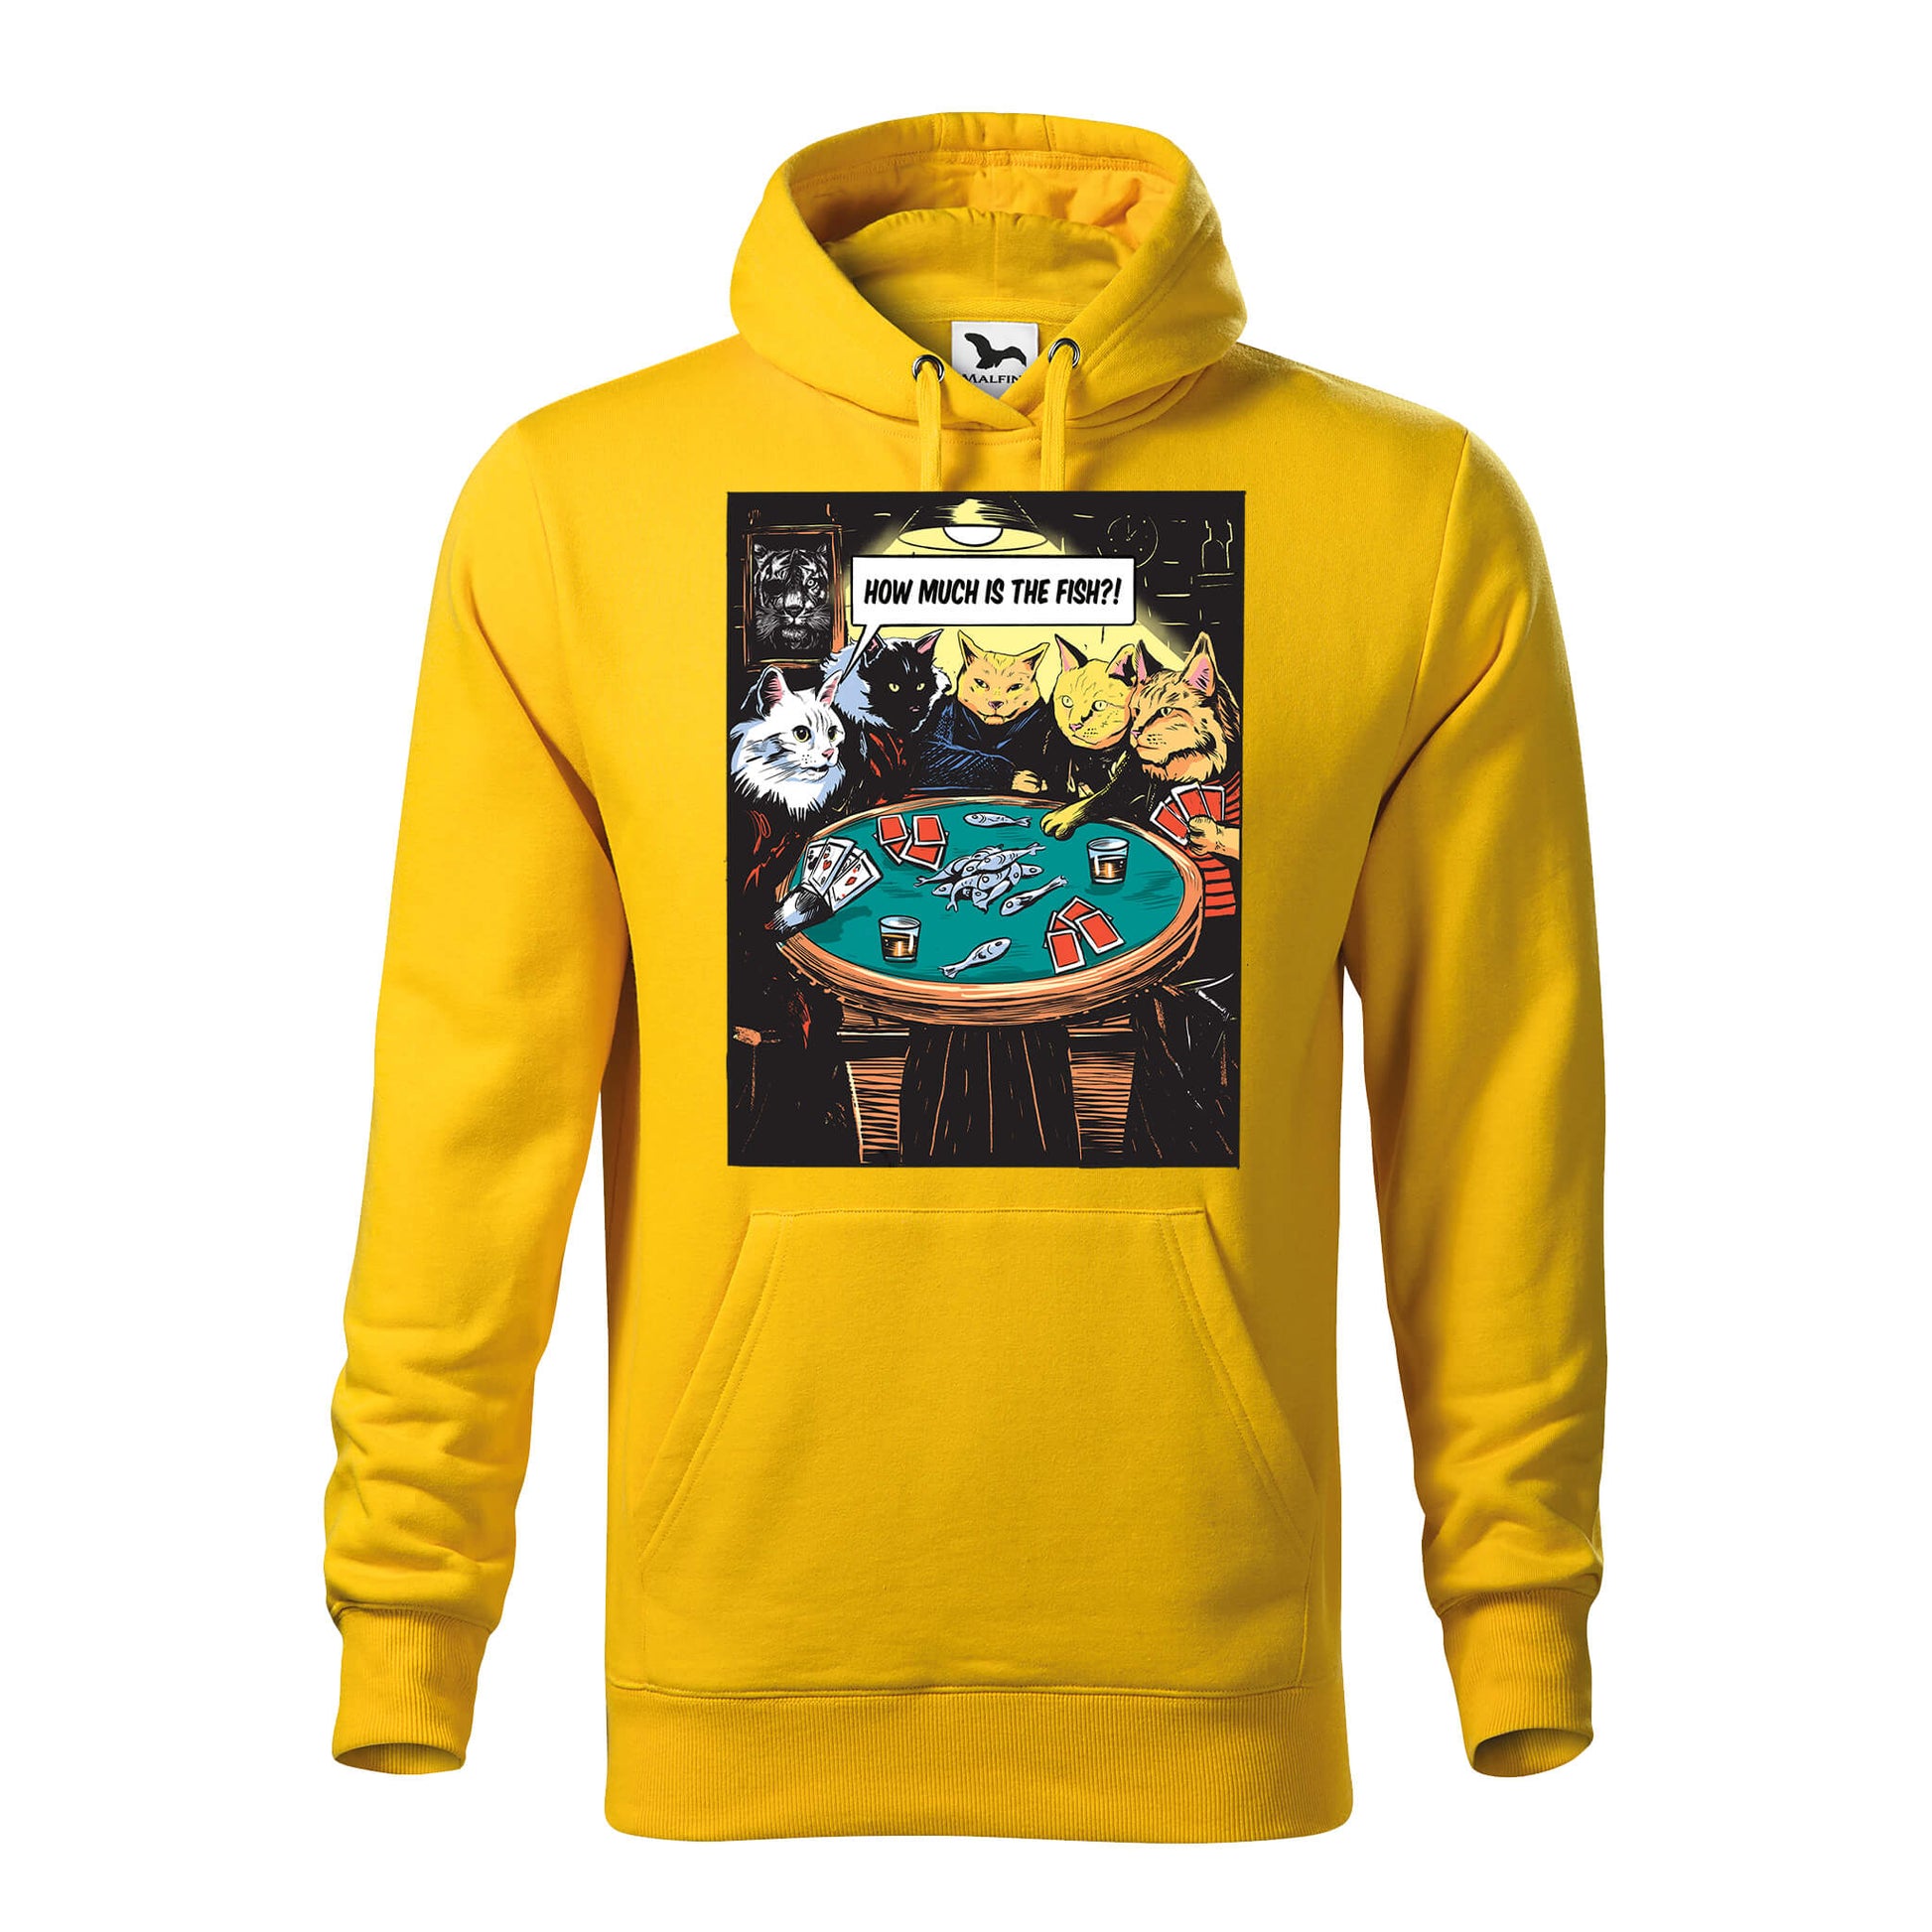 How much is the fish hoodie - rvdesignprint